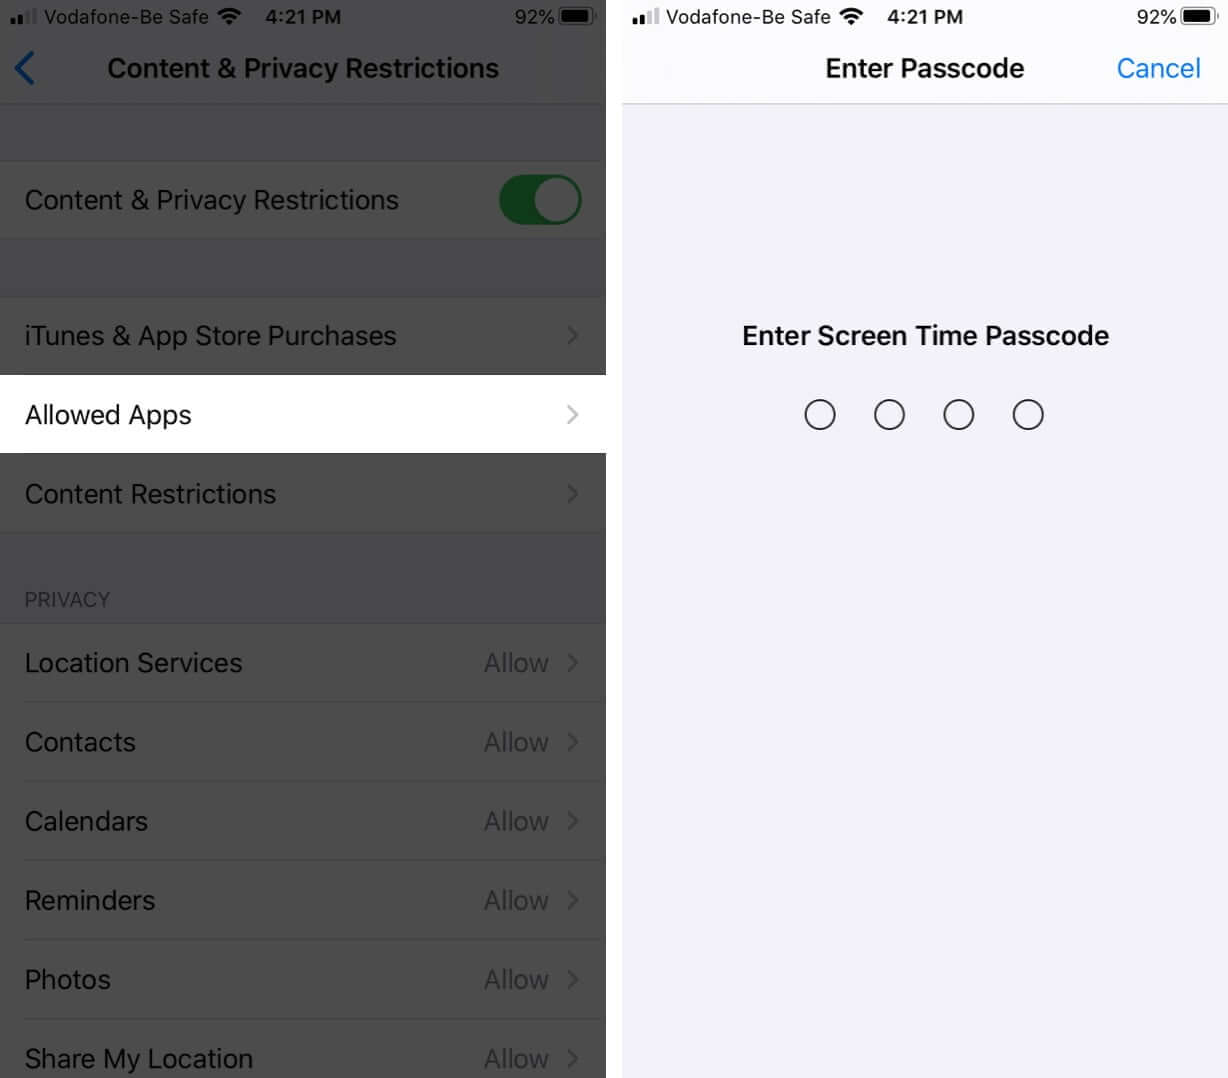 Tap on Allowed Apps and Enter Screen Time Passcode